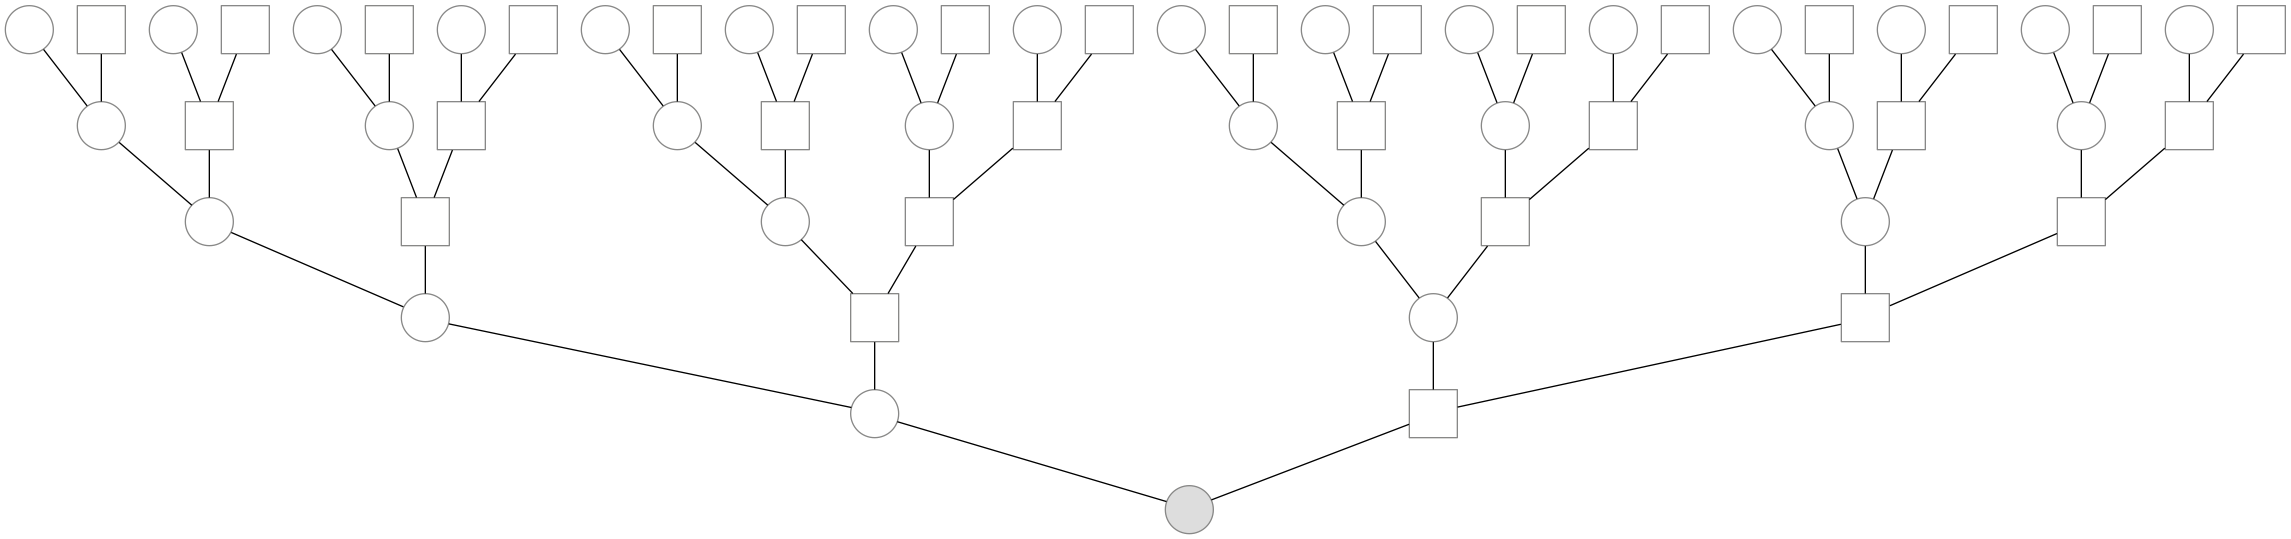 A genealogy back five generations. k generations back, one has 2k ancestors. Circles indicate females, and squares males. The shaded individual is a present-day female.